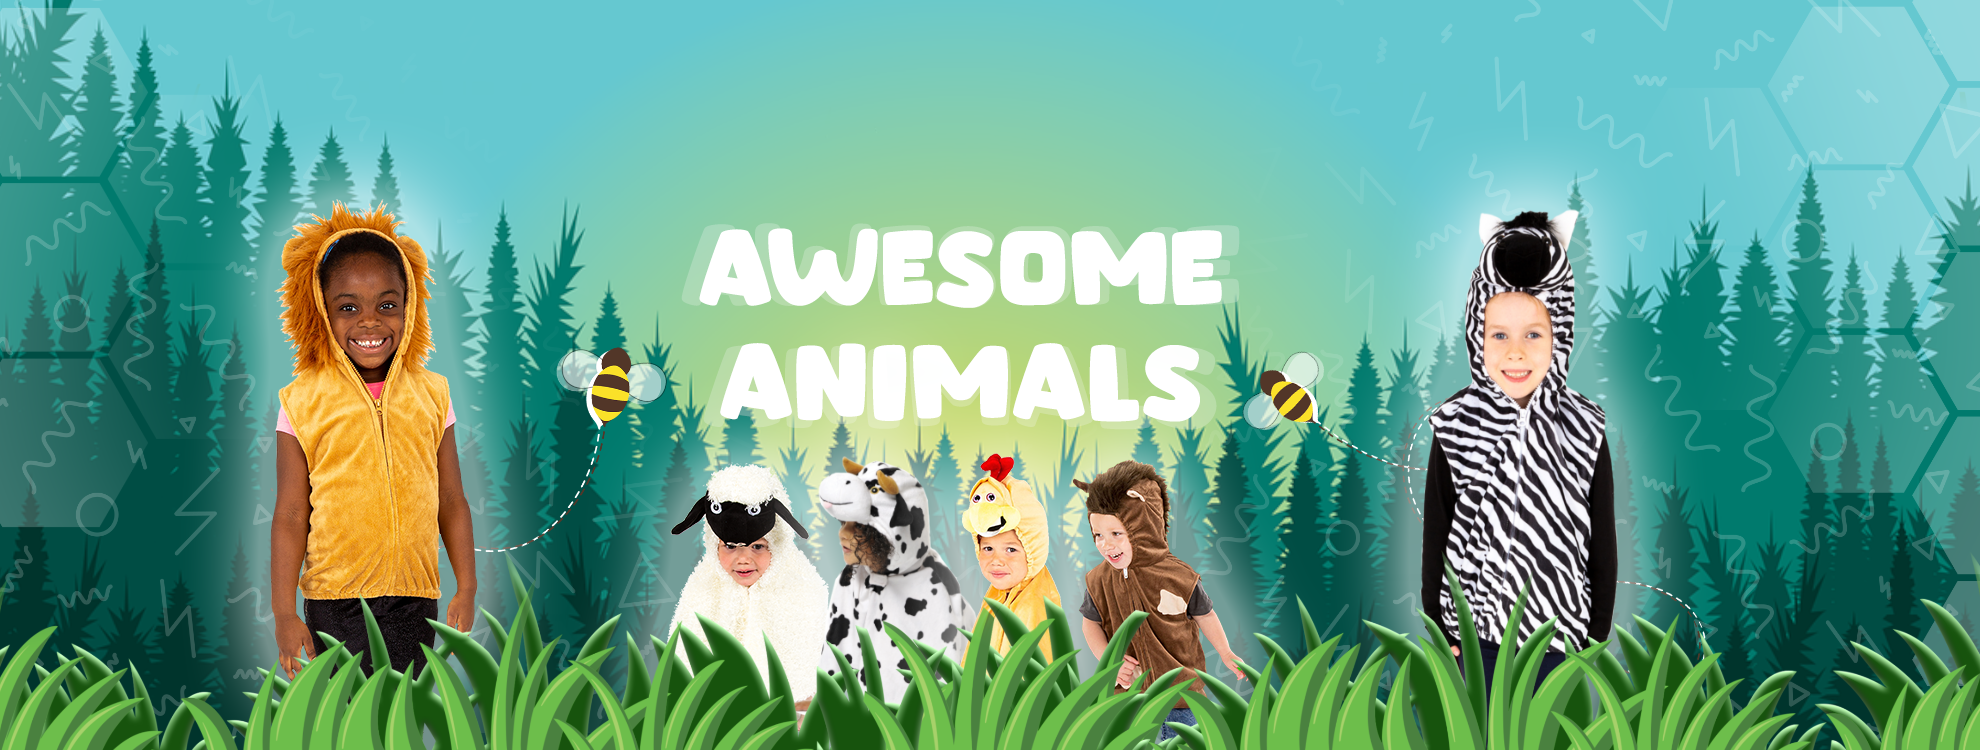 Awesome Animals & Creatures!